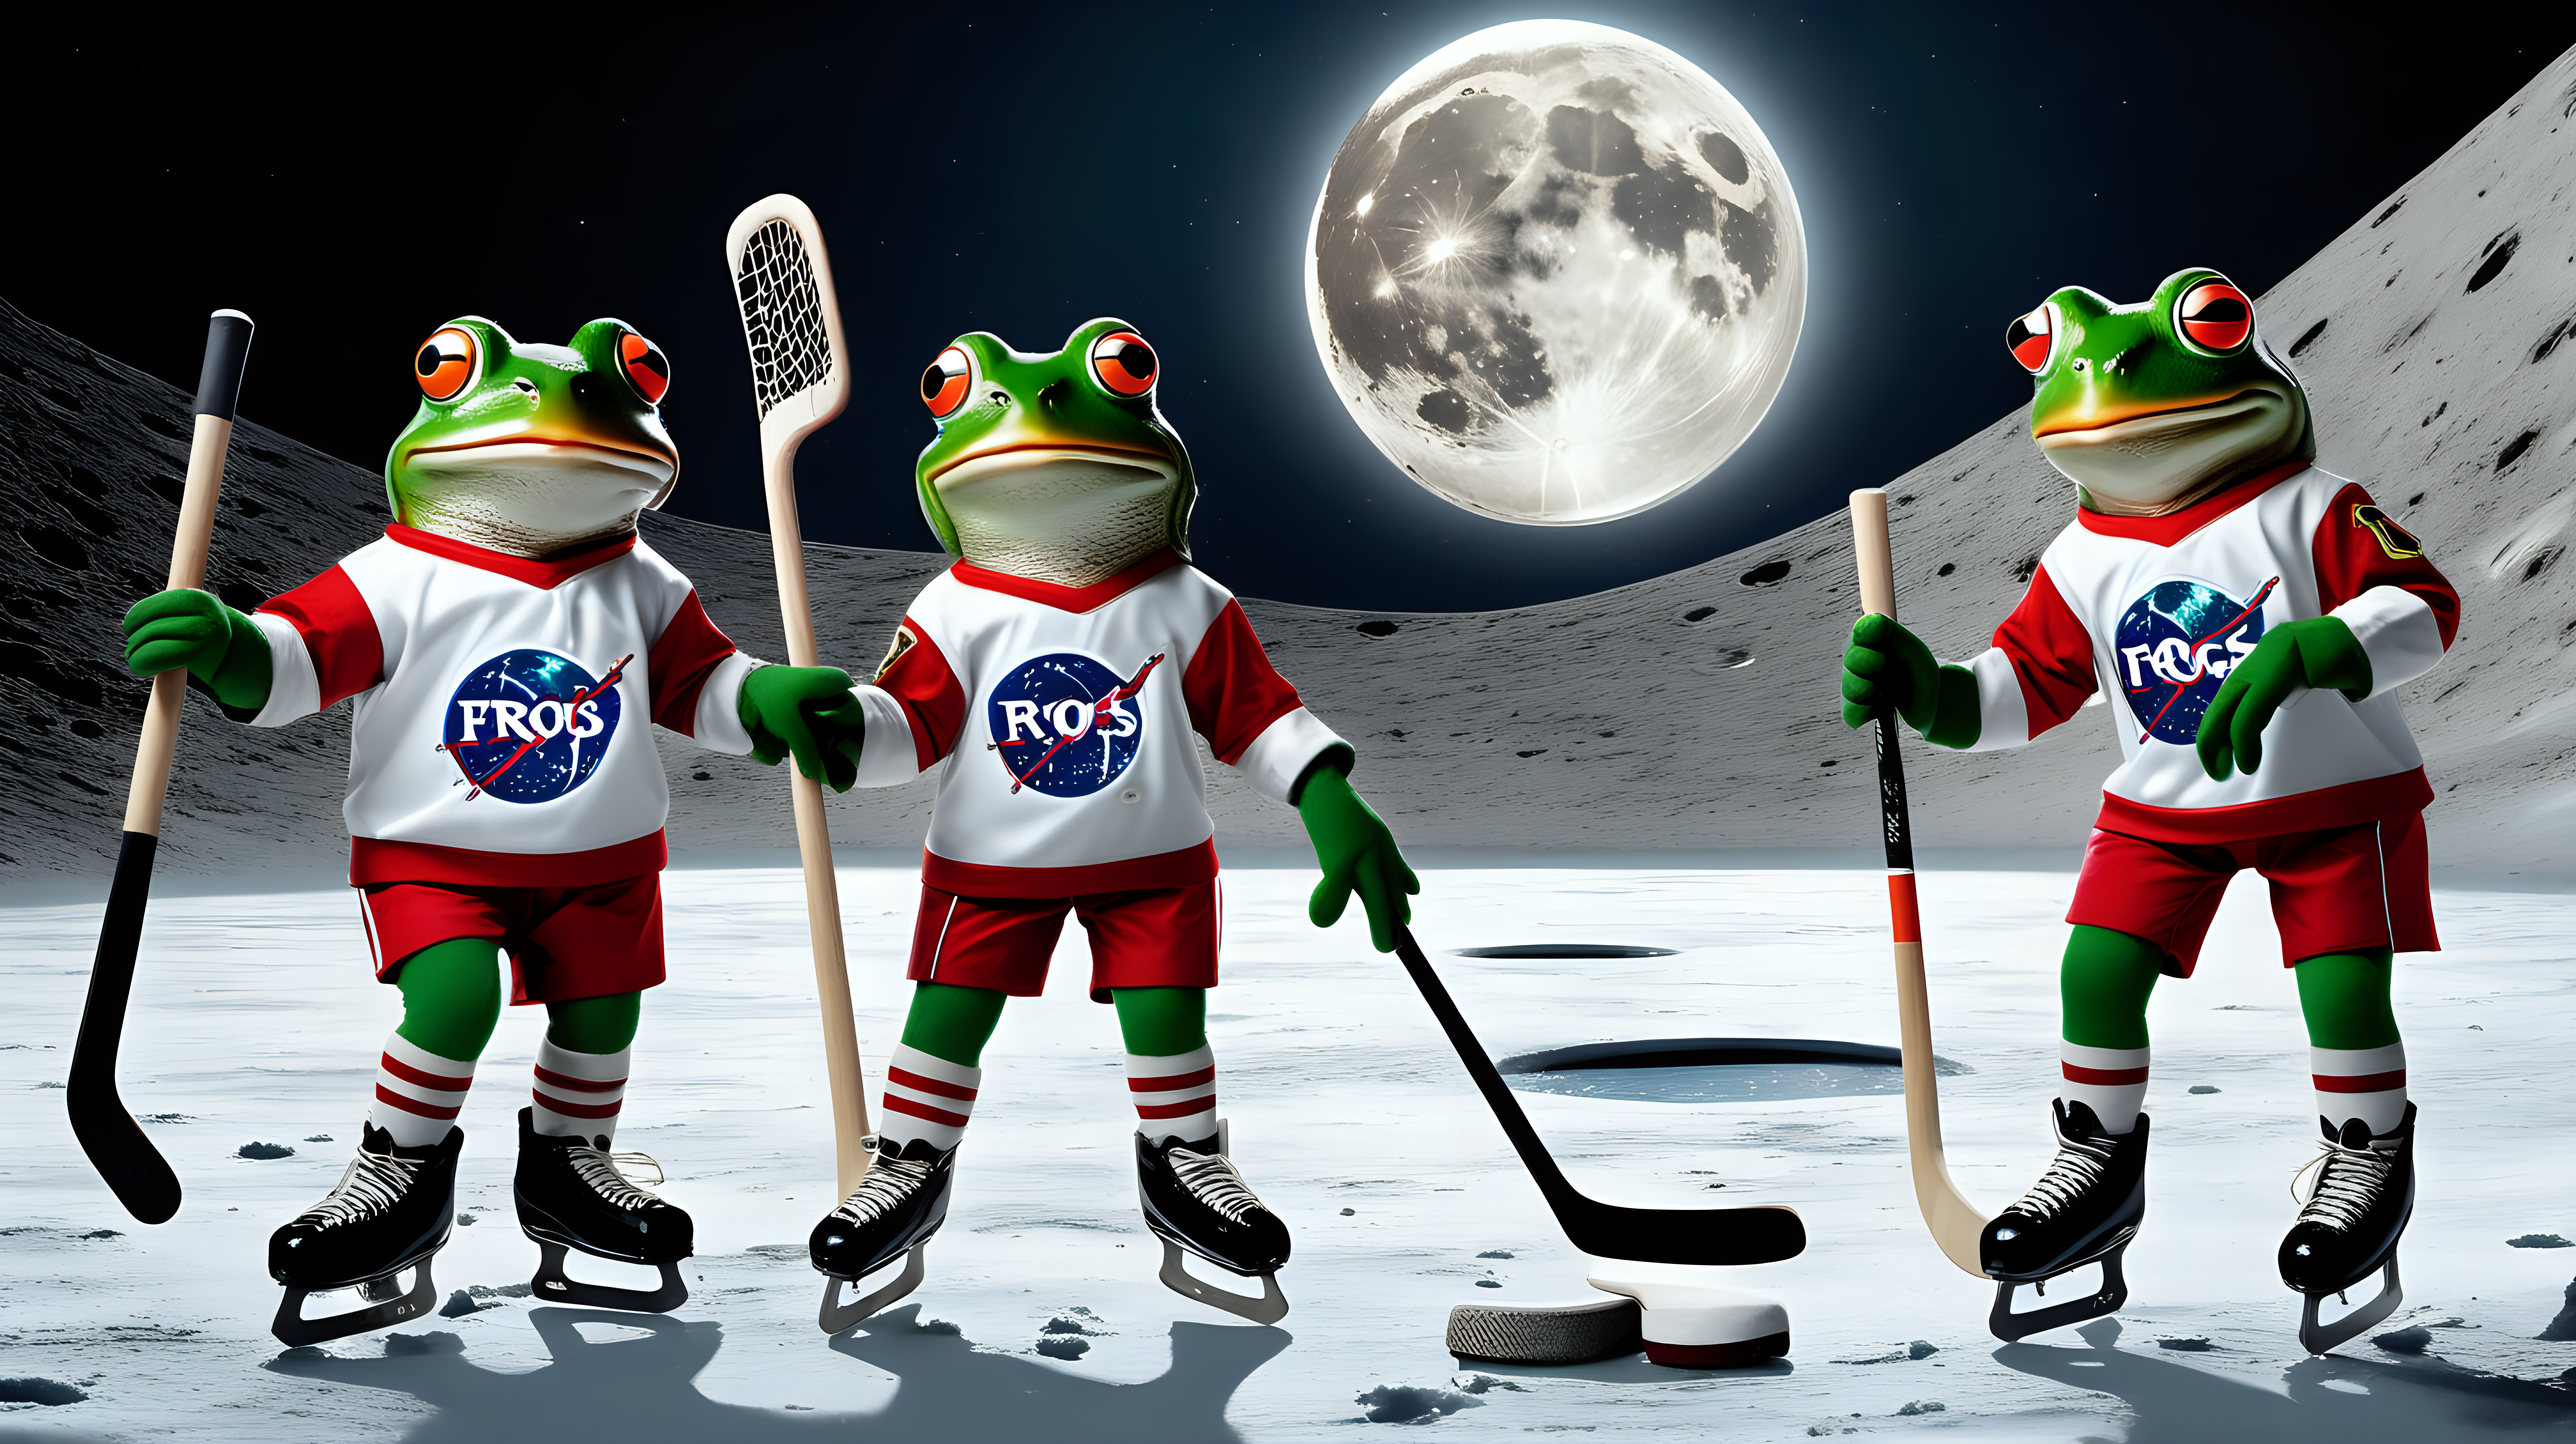 frogs dressed in uniforms and ice skates playing hockey on the moon